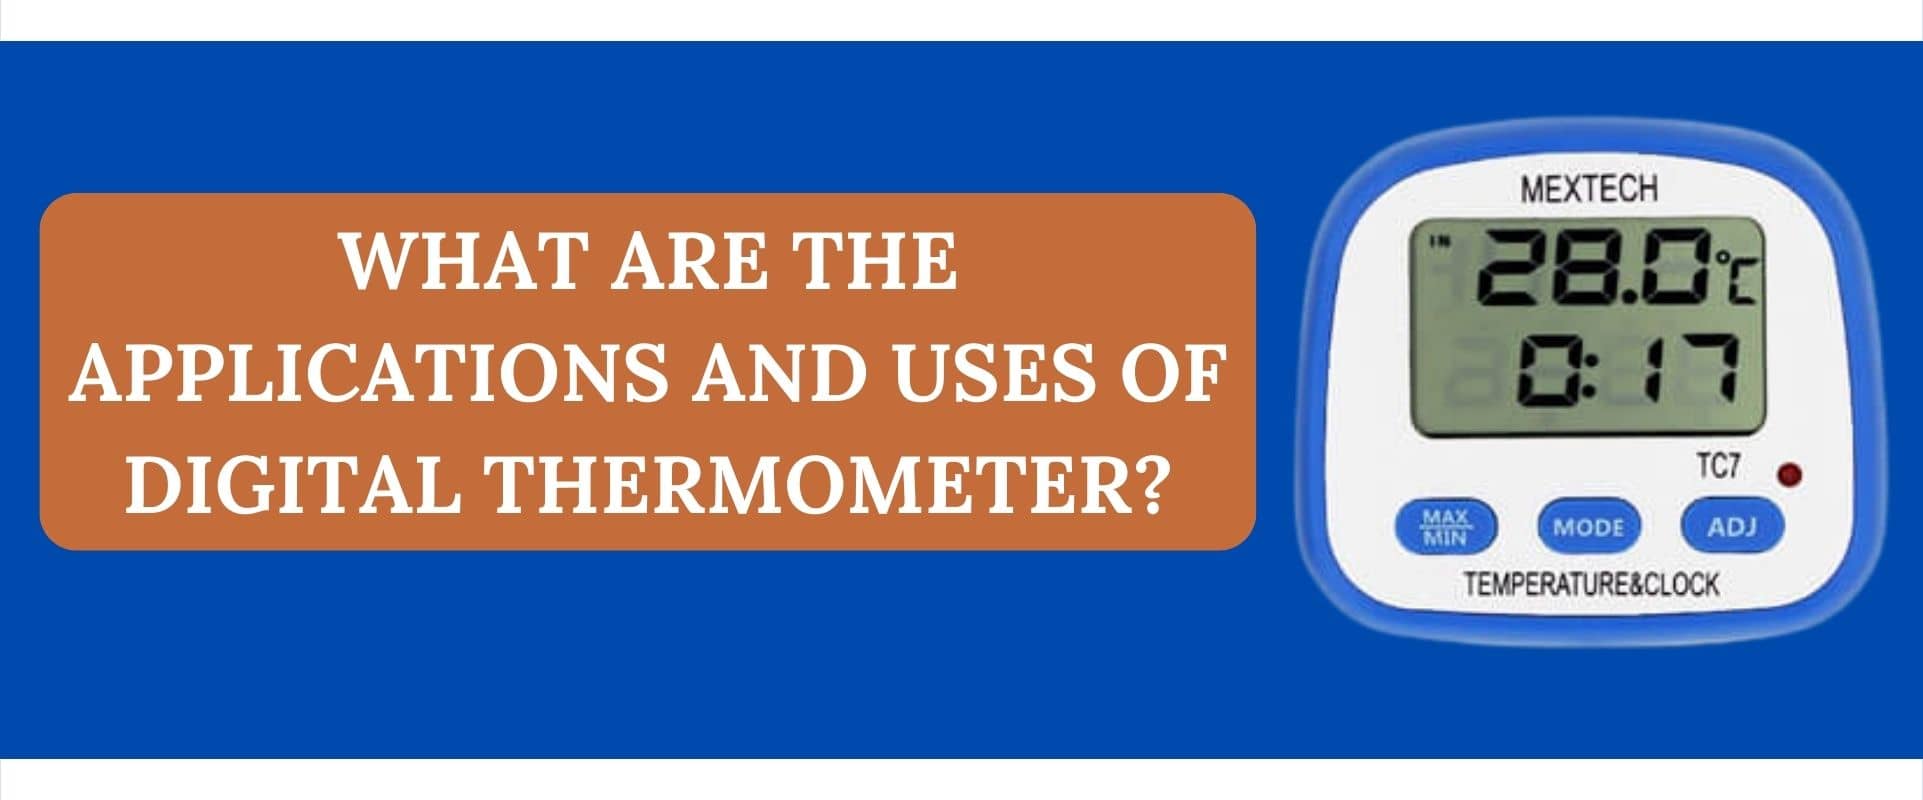 Applications and Uses of Digital Thermometer